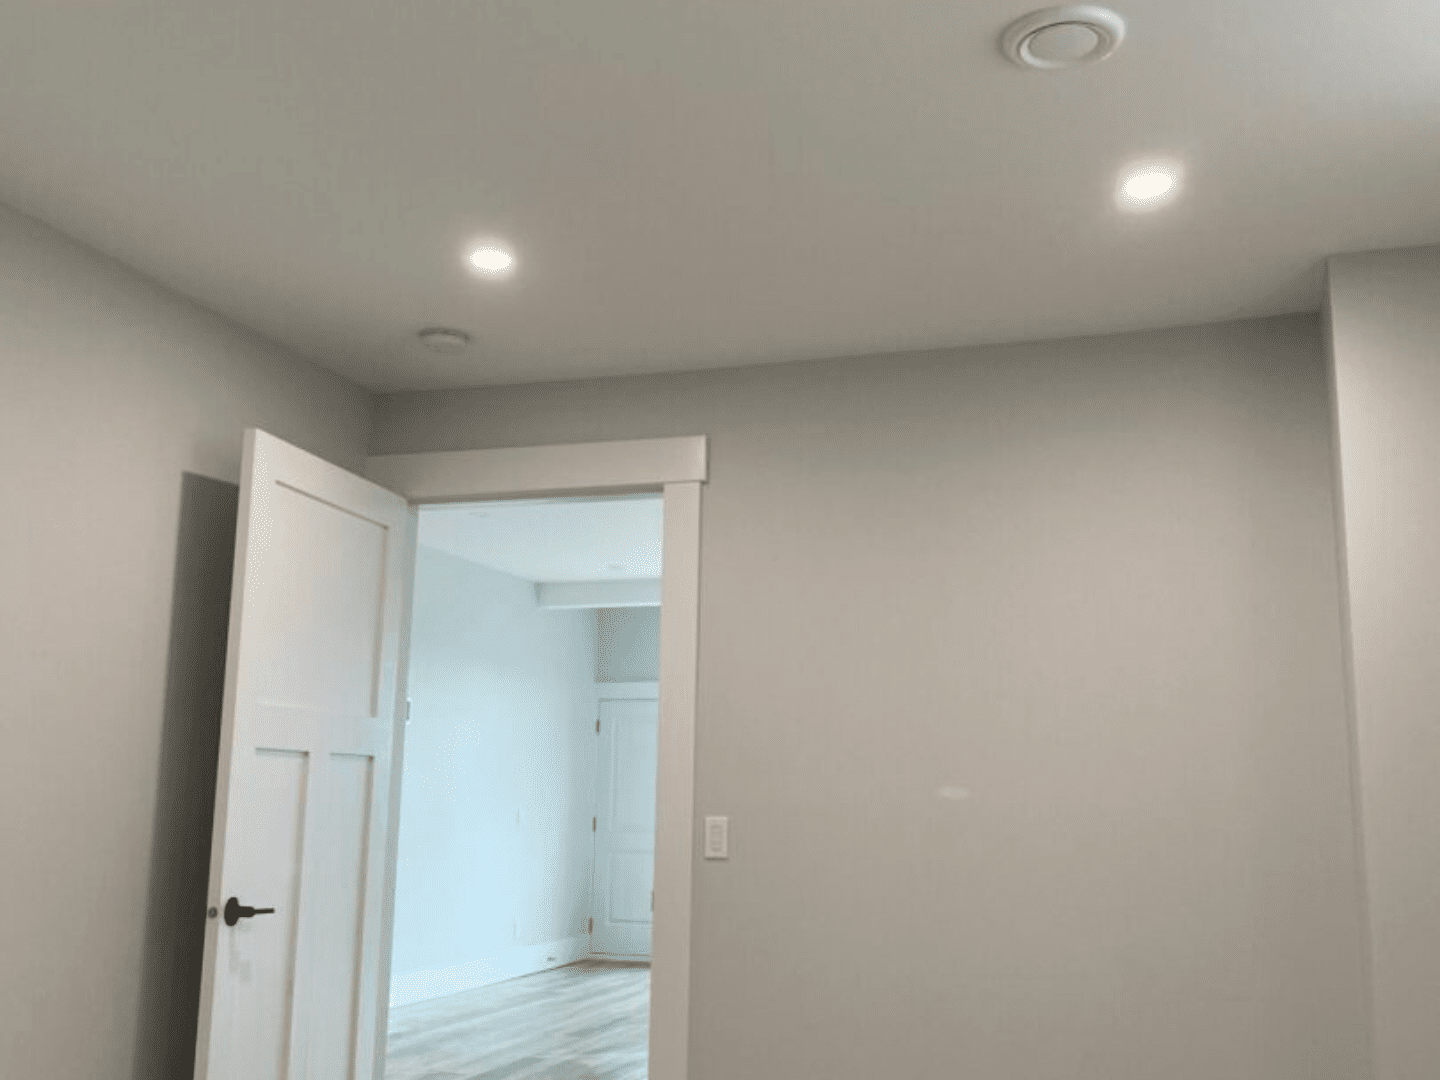 A room with white walls and ceiling lights.